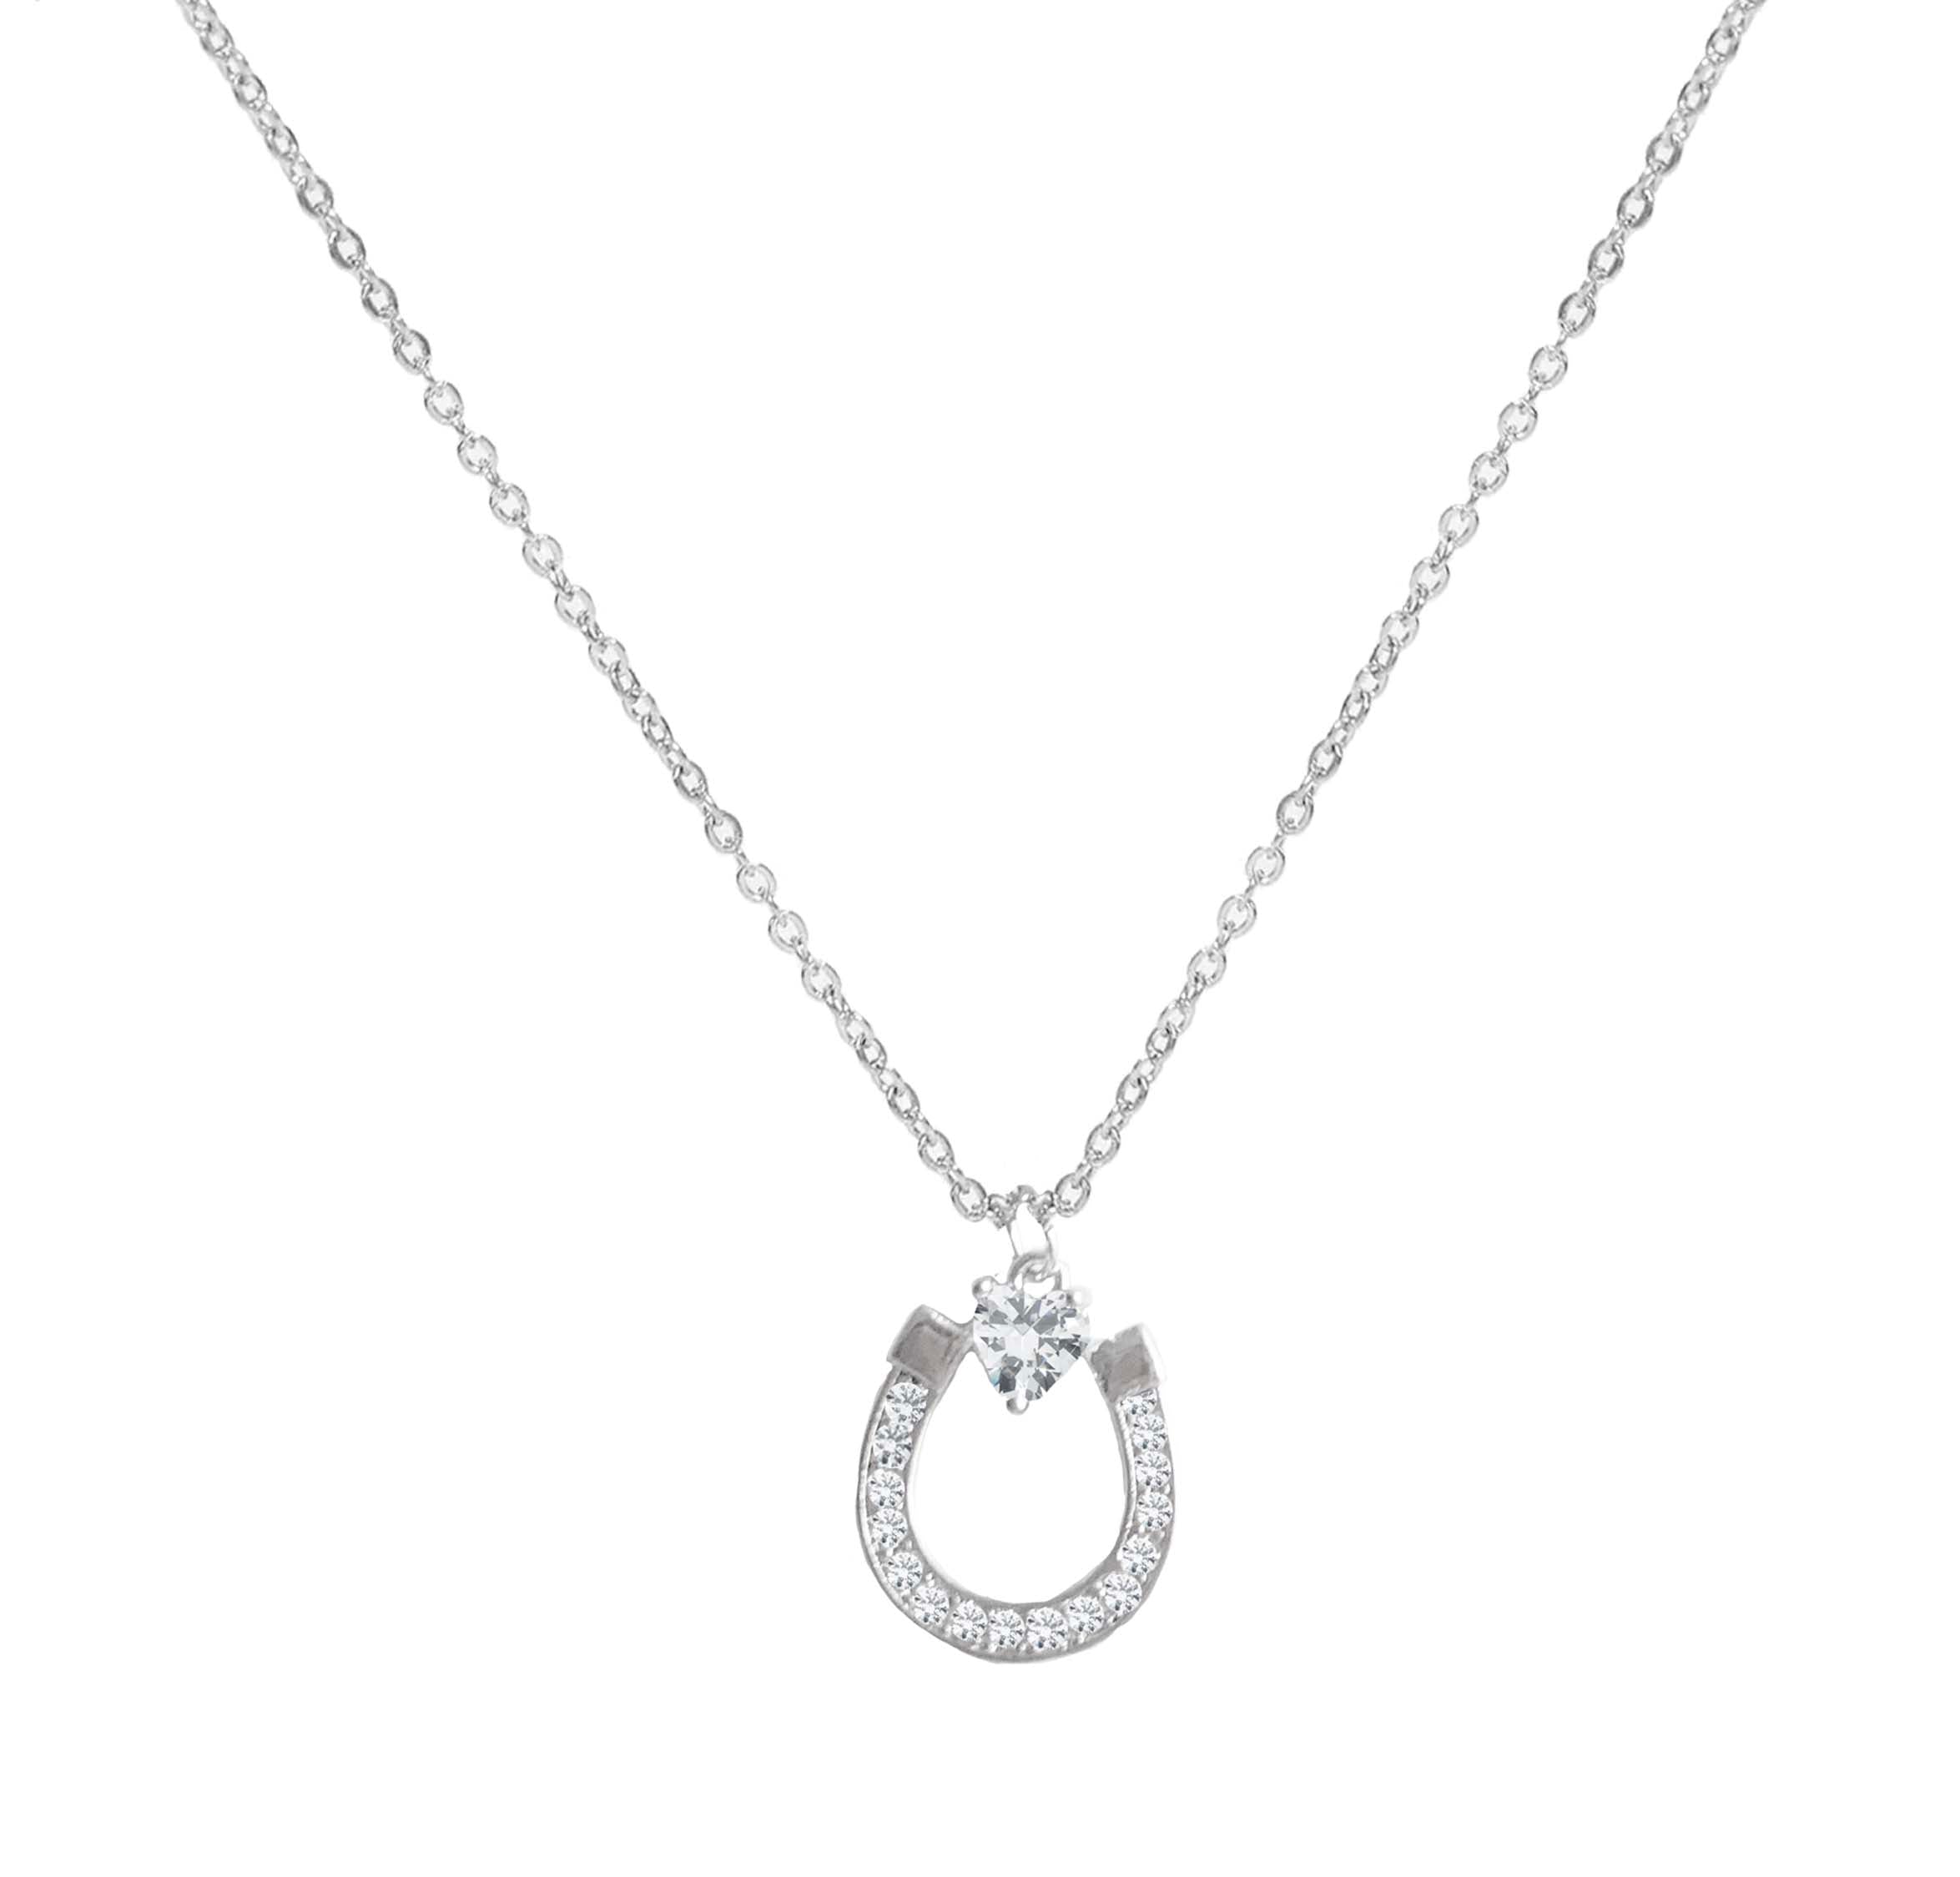 Horse Shoe Lucky Necklace CZ Crystal Pendant Necklace Silver Chain with Gift Pouch